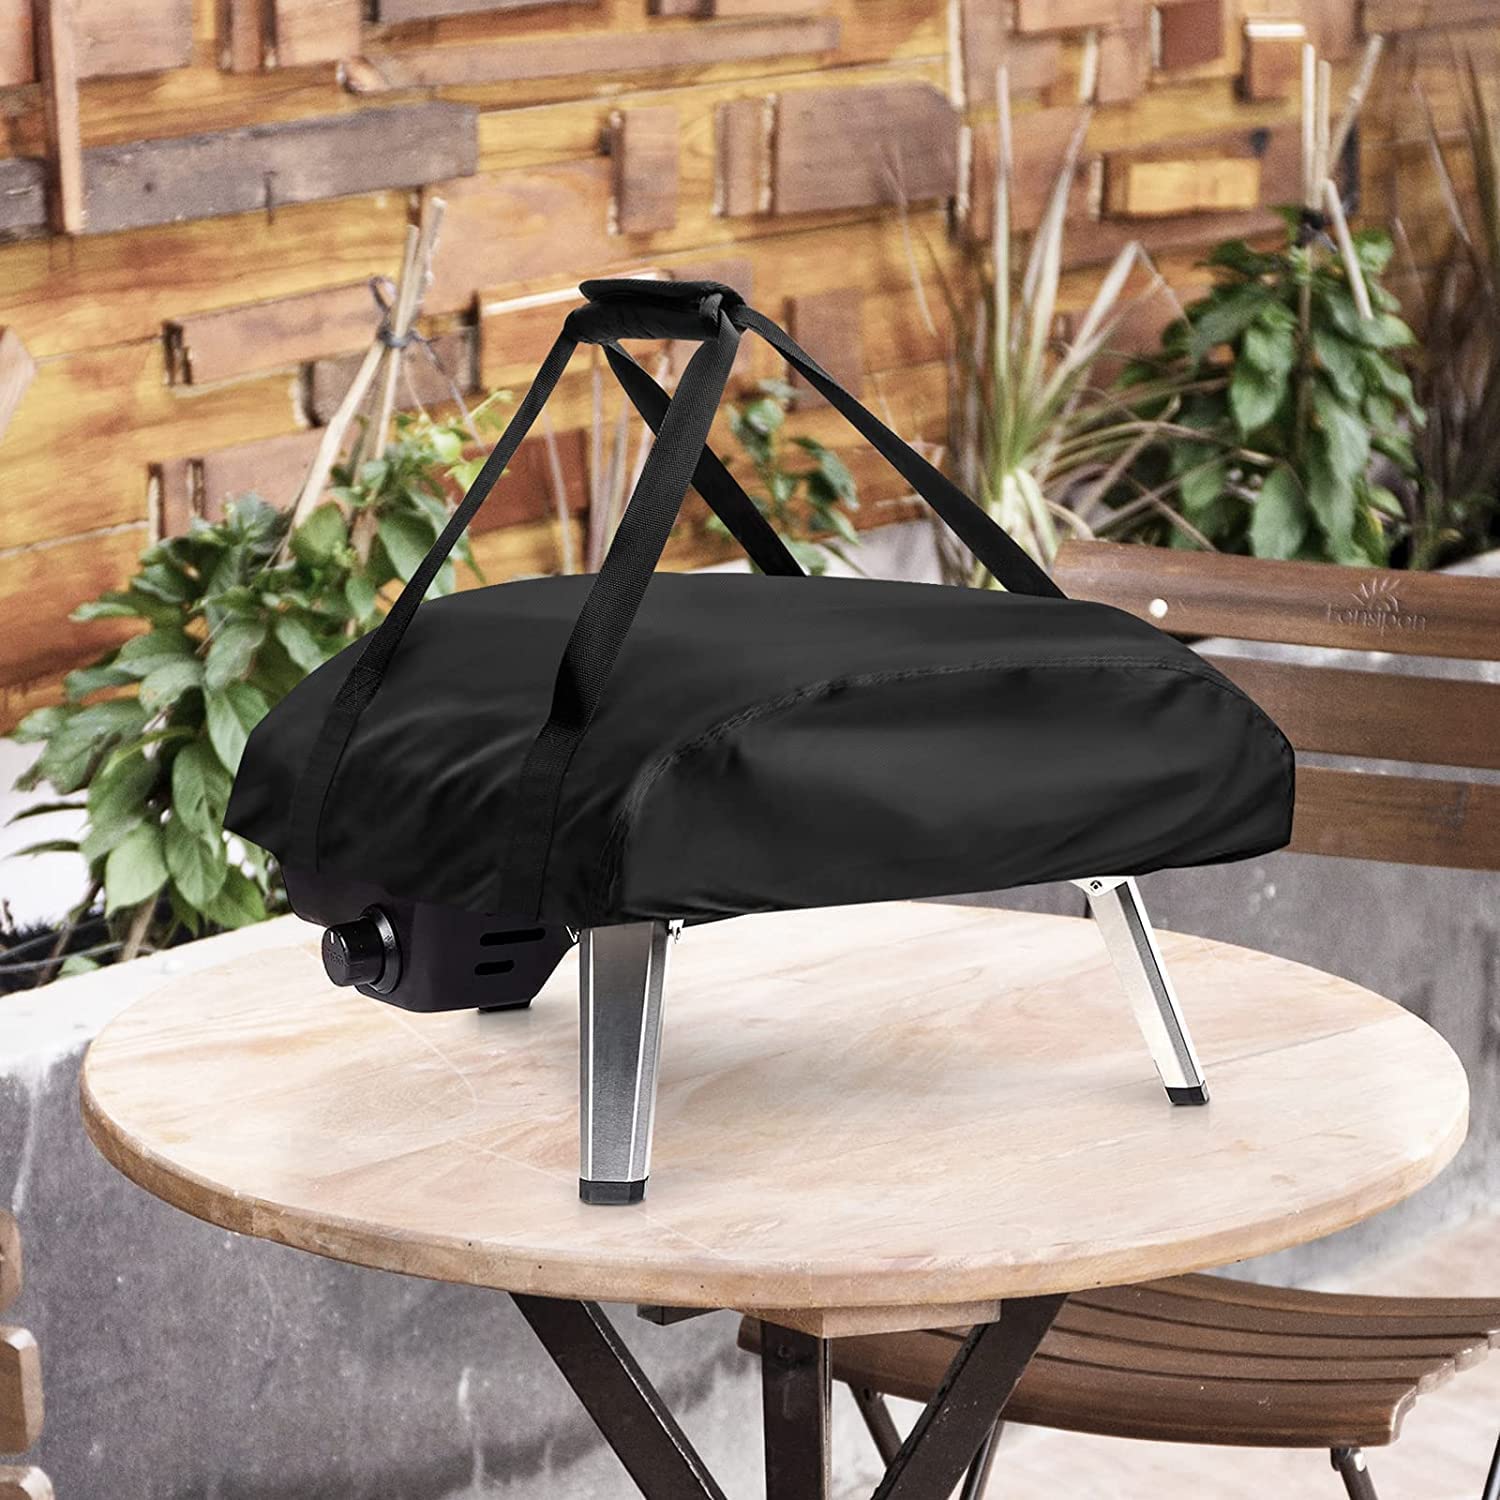 Flymer Pizza Oven Cover for Ooni Koda 16, Portable Outdoor Pizza Oven Carry Cover Waterproof Pizza Oven - image 5 of 6